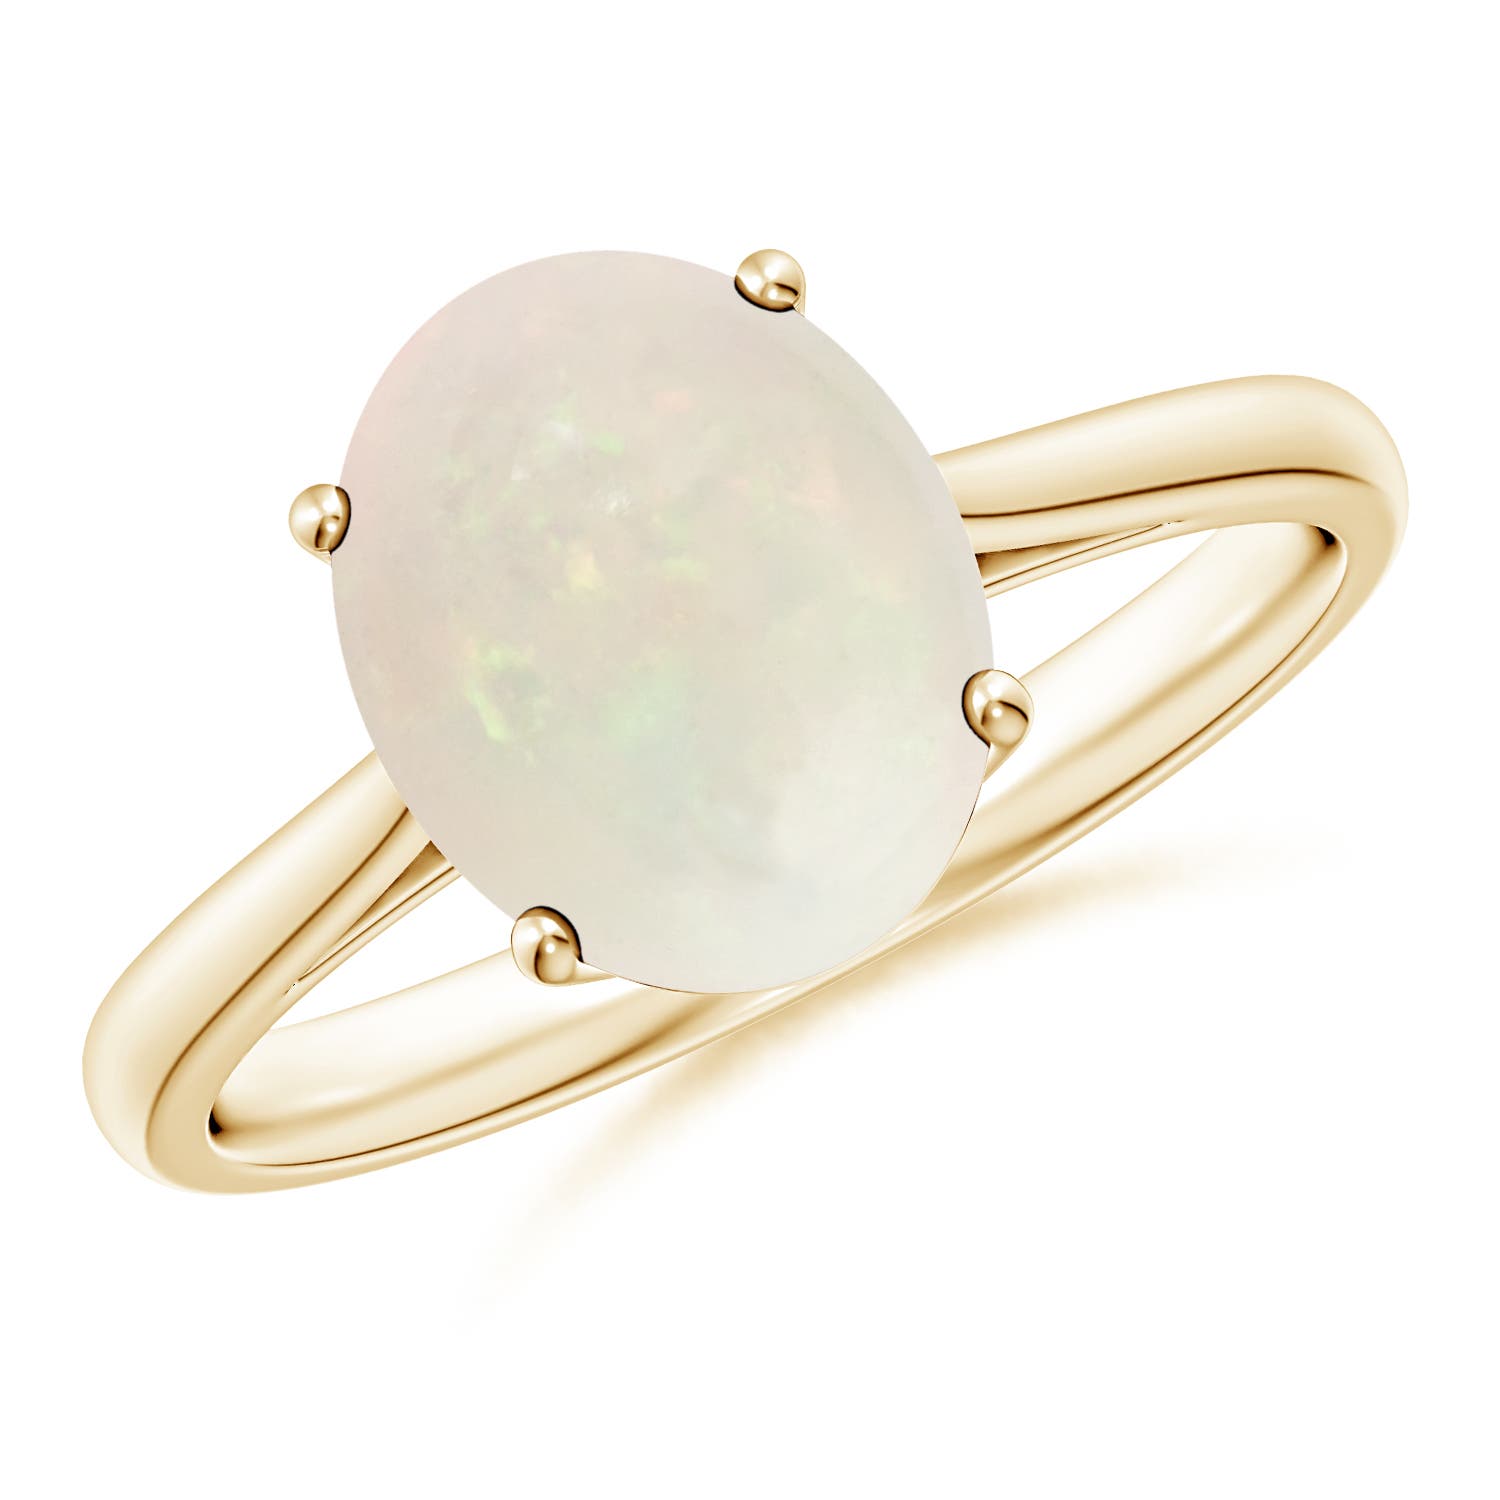 A - Opal / 1.45 CT / 14 KT Yellow Gold